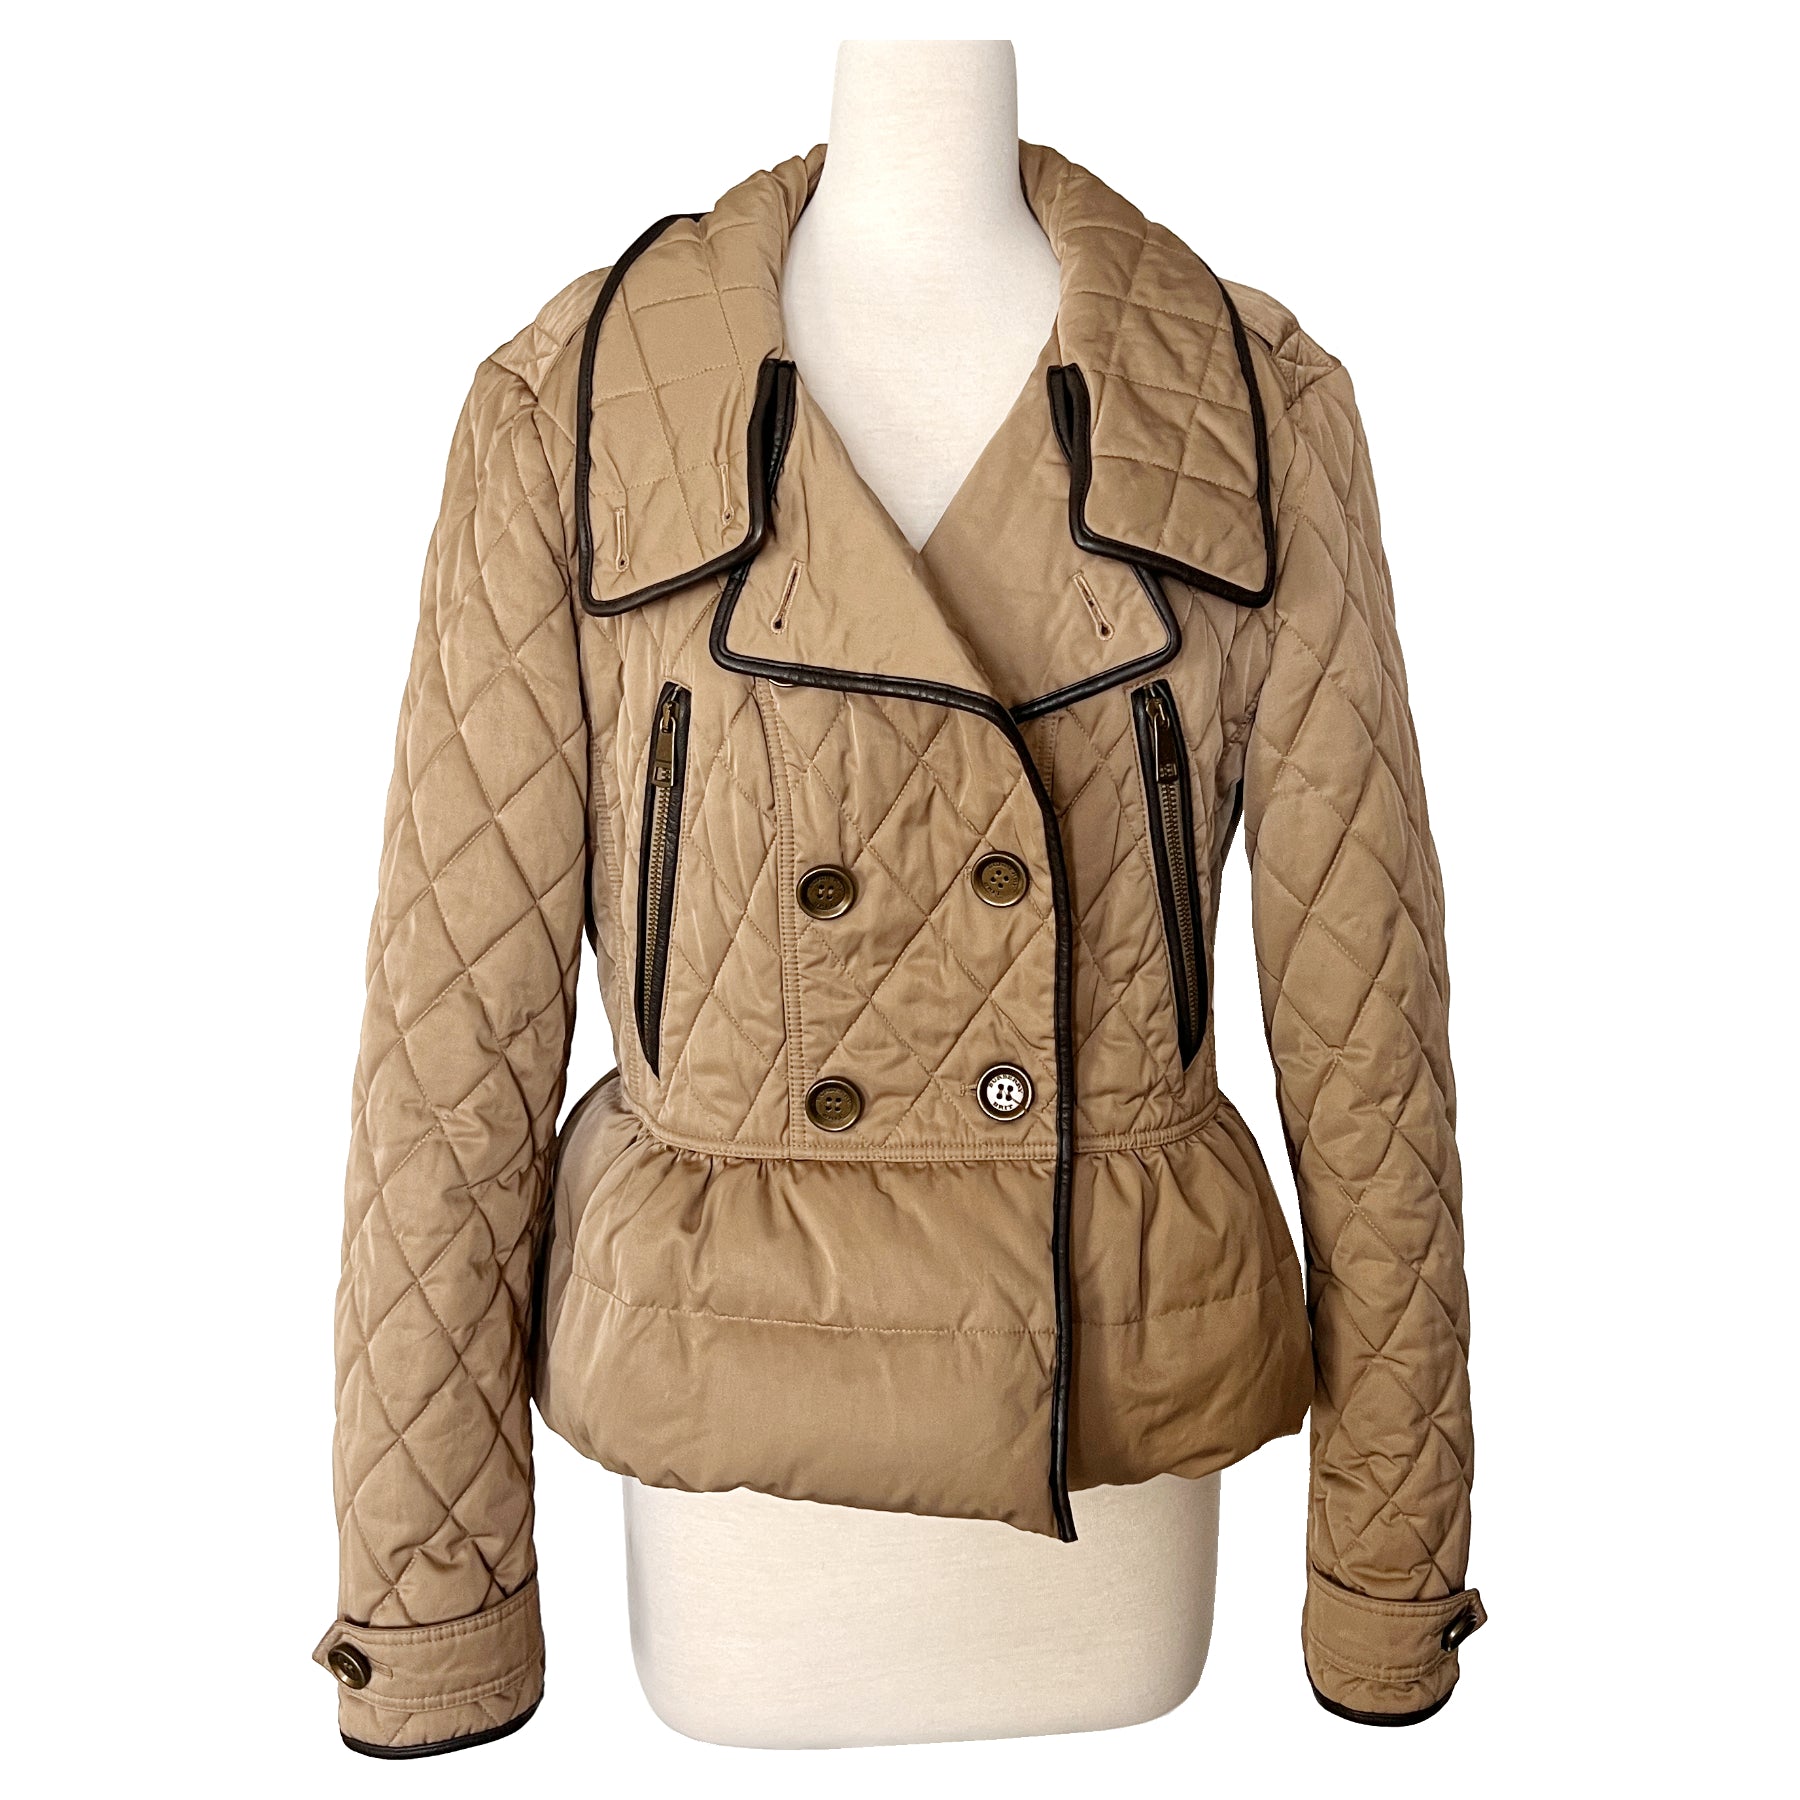 Burberry Brit Tan Khaki Leather Trim Quilted Puffer Double Breasted Jacket Coat